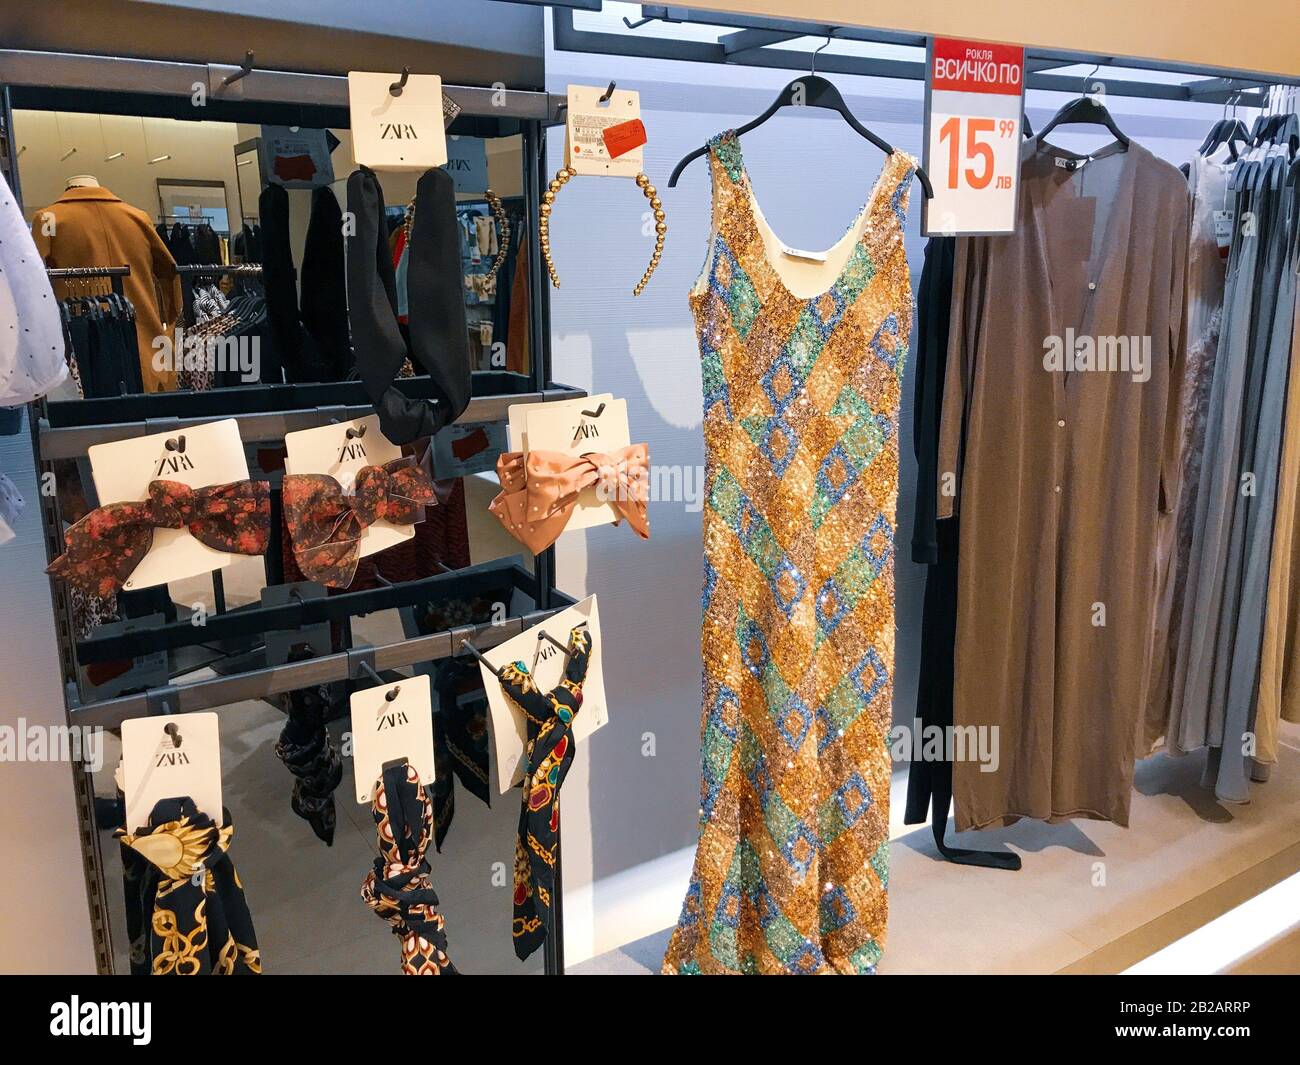 Page 3 - Zara Store High Resolution Stock Photography and Images - Alamy